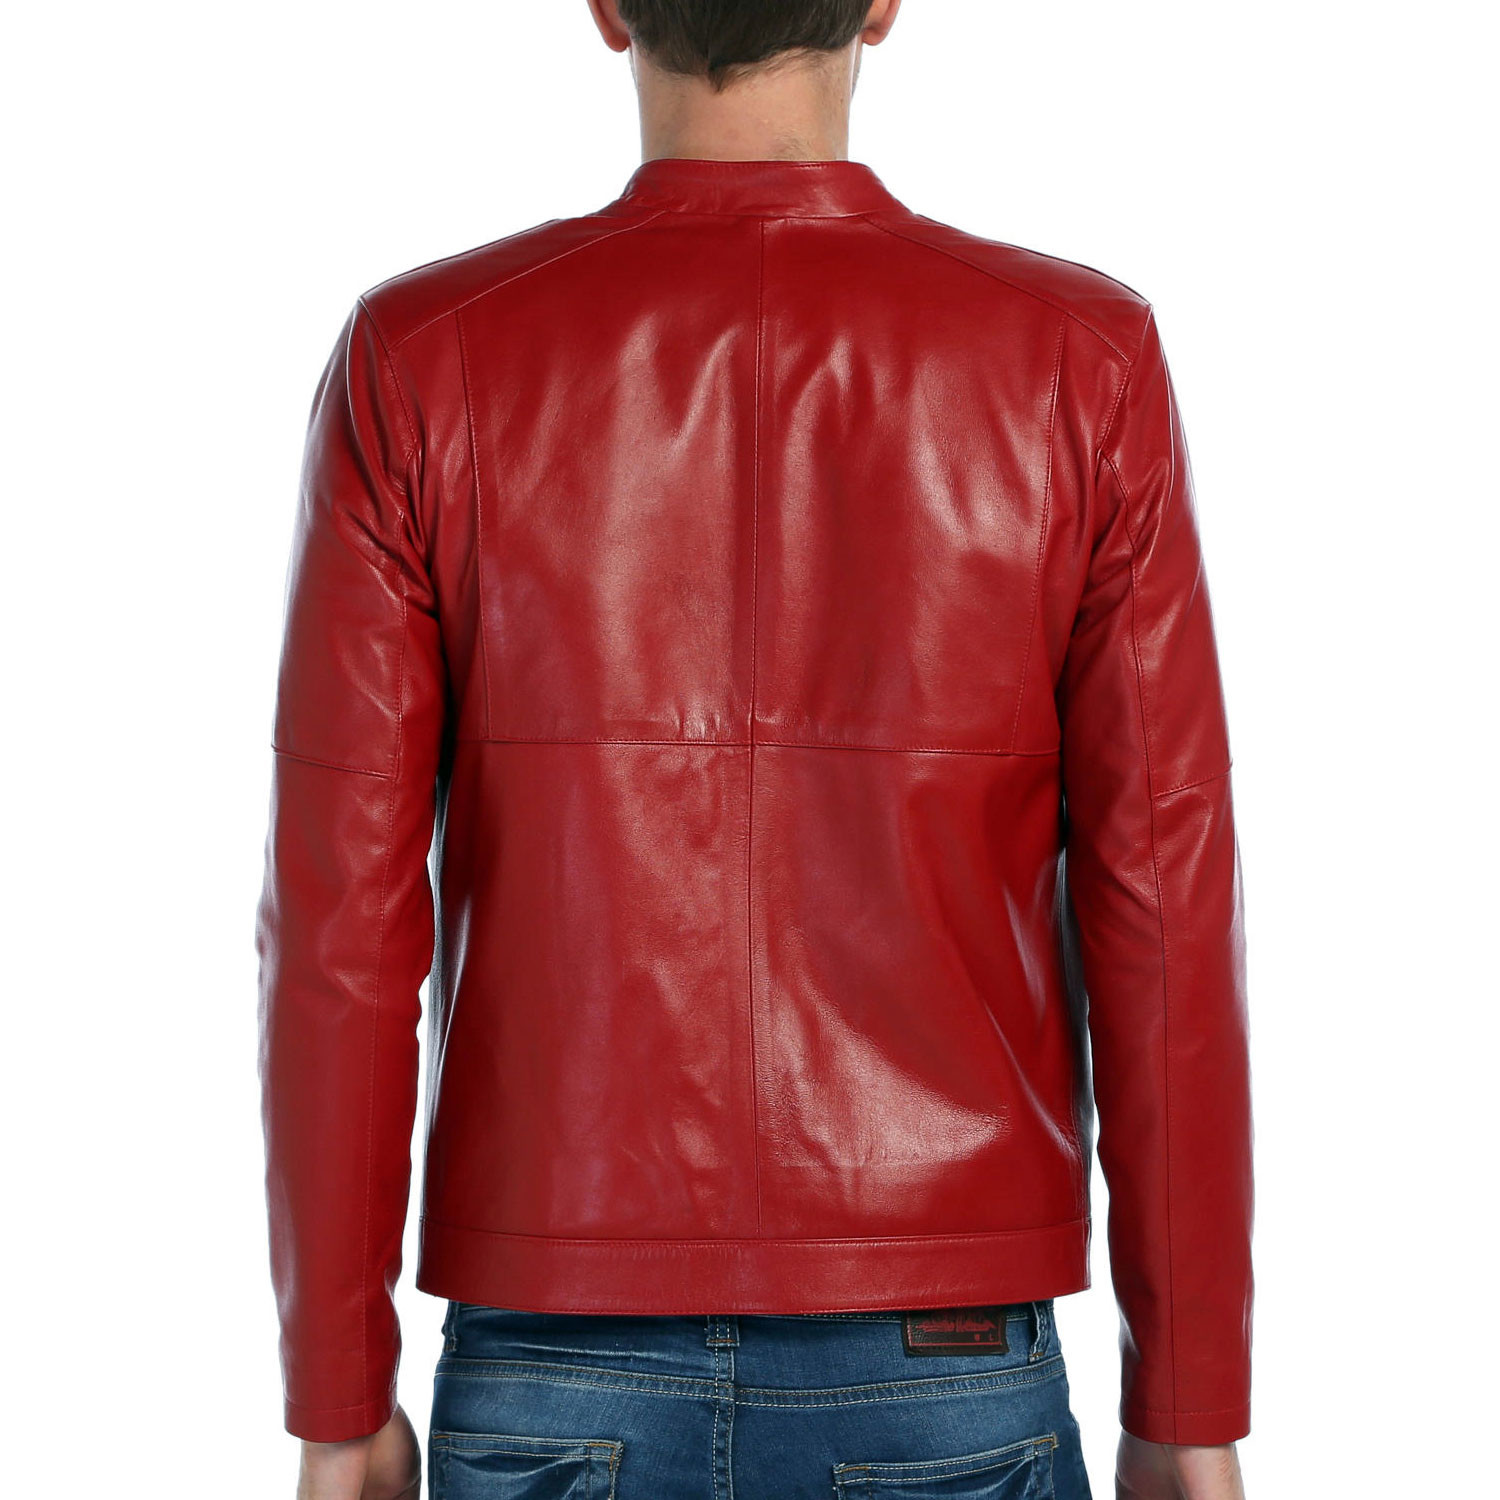 Kando Leather Jacket // Red (XS) - Vivamood - Touch of Modern